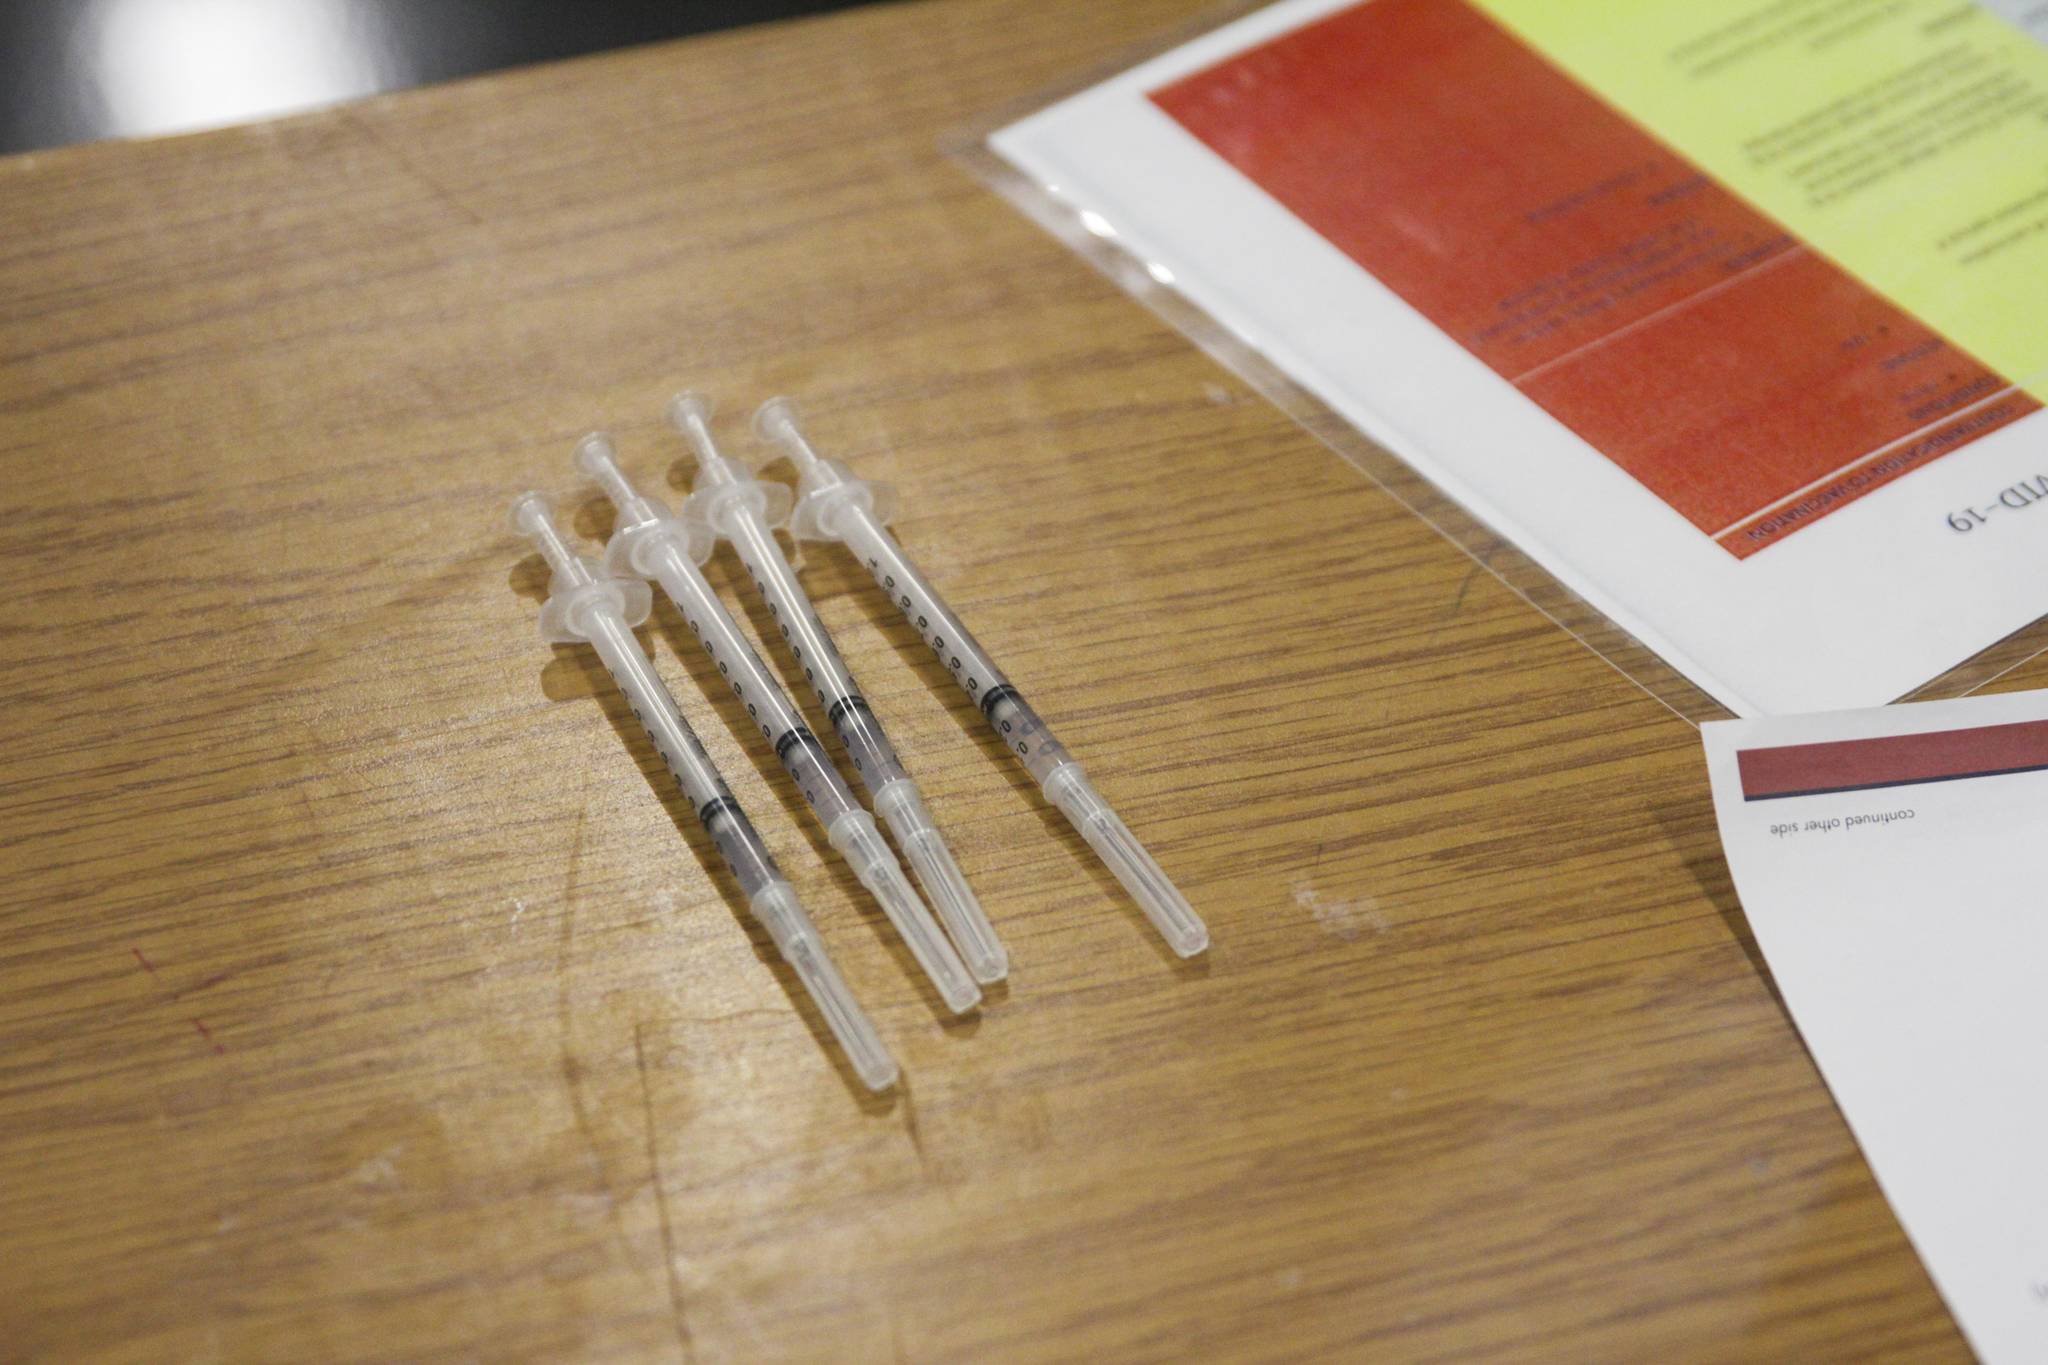 Additional doses of COVID-19 vaccine are expected to be available at an upcoming vaccine clinic due to a new partnership, City and Borough of Juneau announced.(Michael S. Lockett / Juneau Empire file)